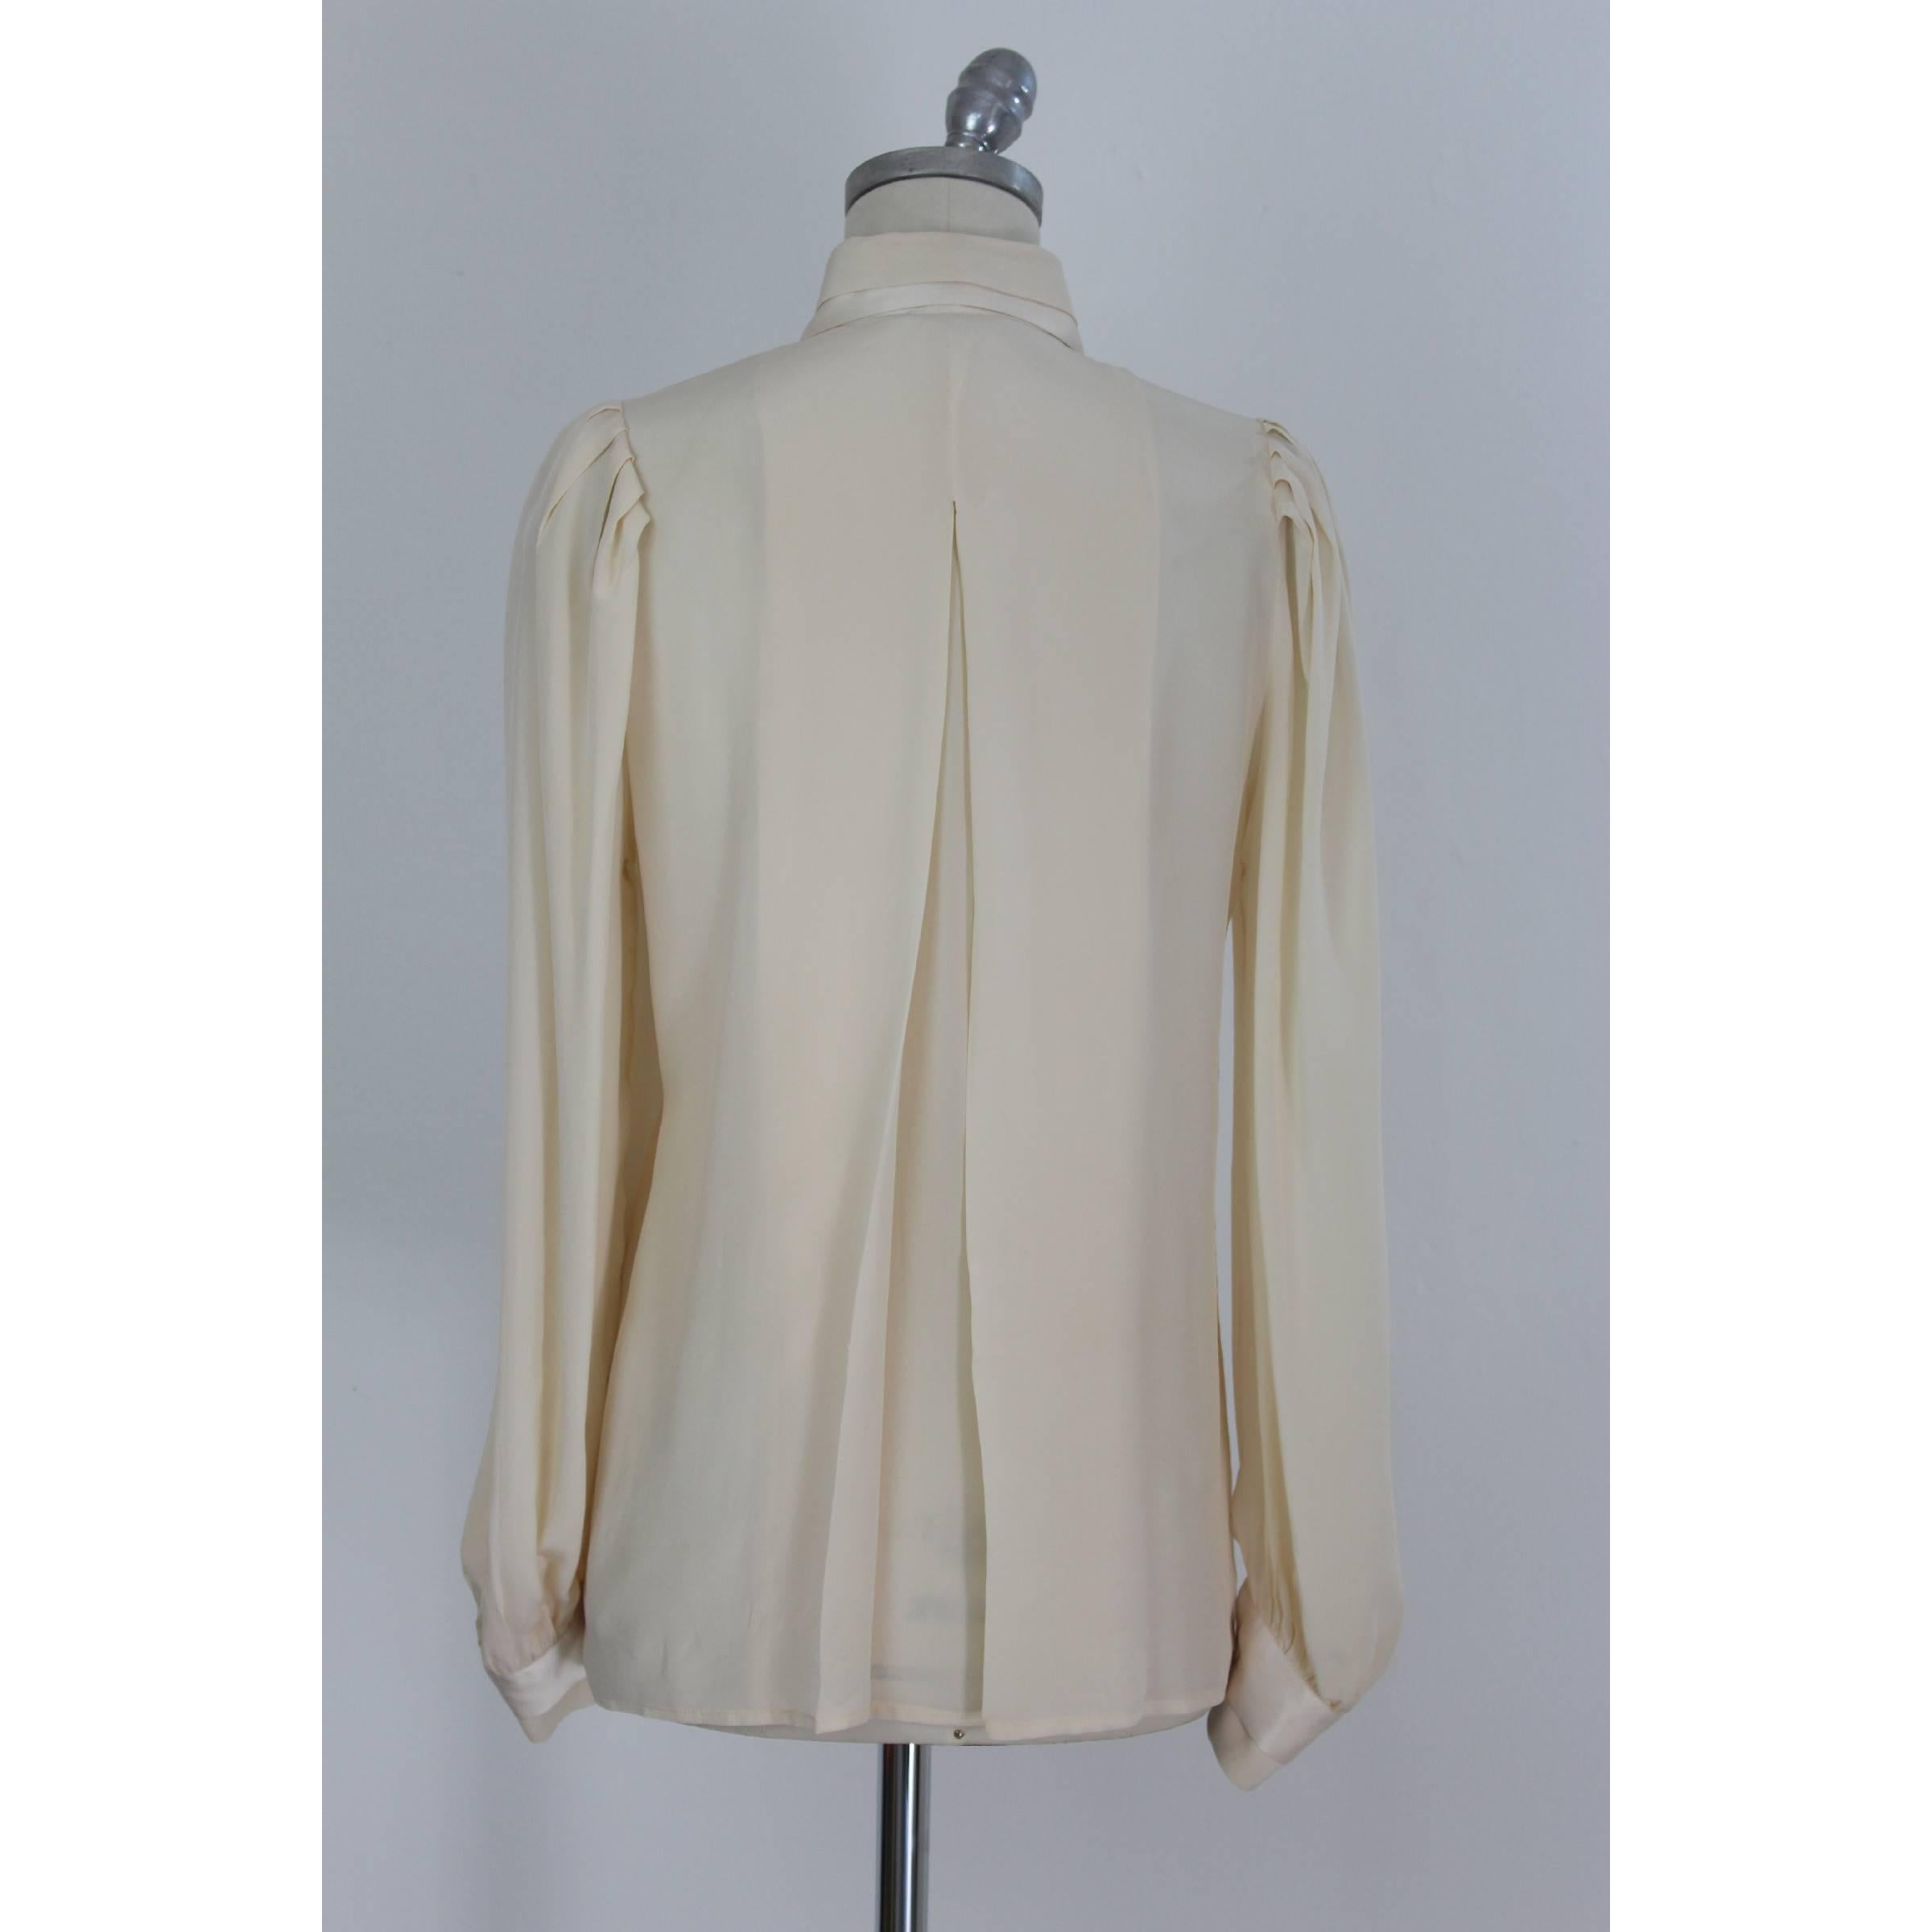 Tuxedo beige silk shirt. Made by Pancaldi in the 70s. The shirt has hidden buttons, double collar. In excellent vintage condition.

Size 42 IT 8 US 10 UK

Shoulder: 42 cm
Bust / Chest: 57 cm
Sleeves: 62 cm
Length: 74 cm

Material: